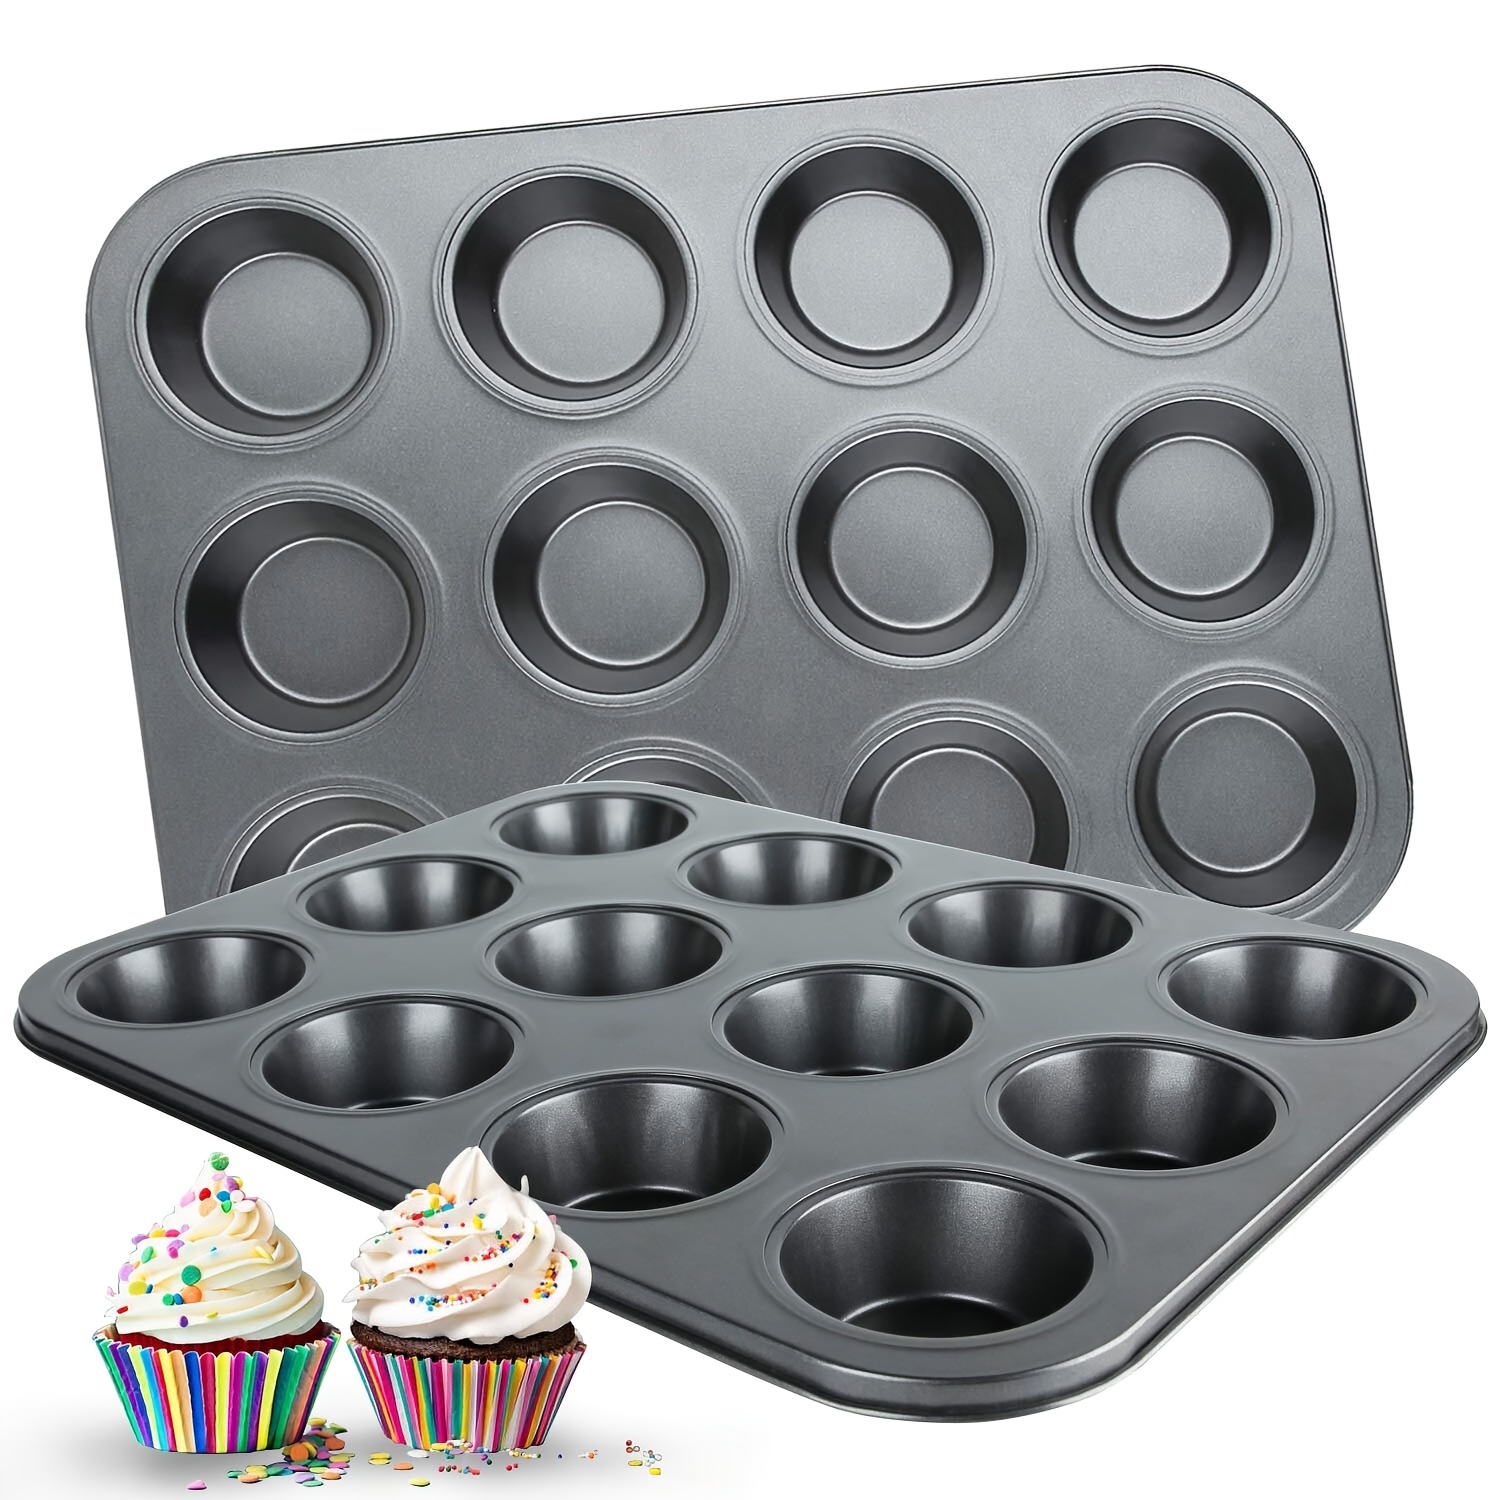 48 Cups Mini Muffin Pan Nonstick Stainless Steel Cupcake Pan Baking Pan  Muffin Baking Mold for Making Muffin, Cakes, Tart, Bread: Home & Kitchen 